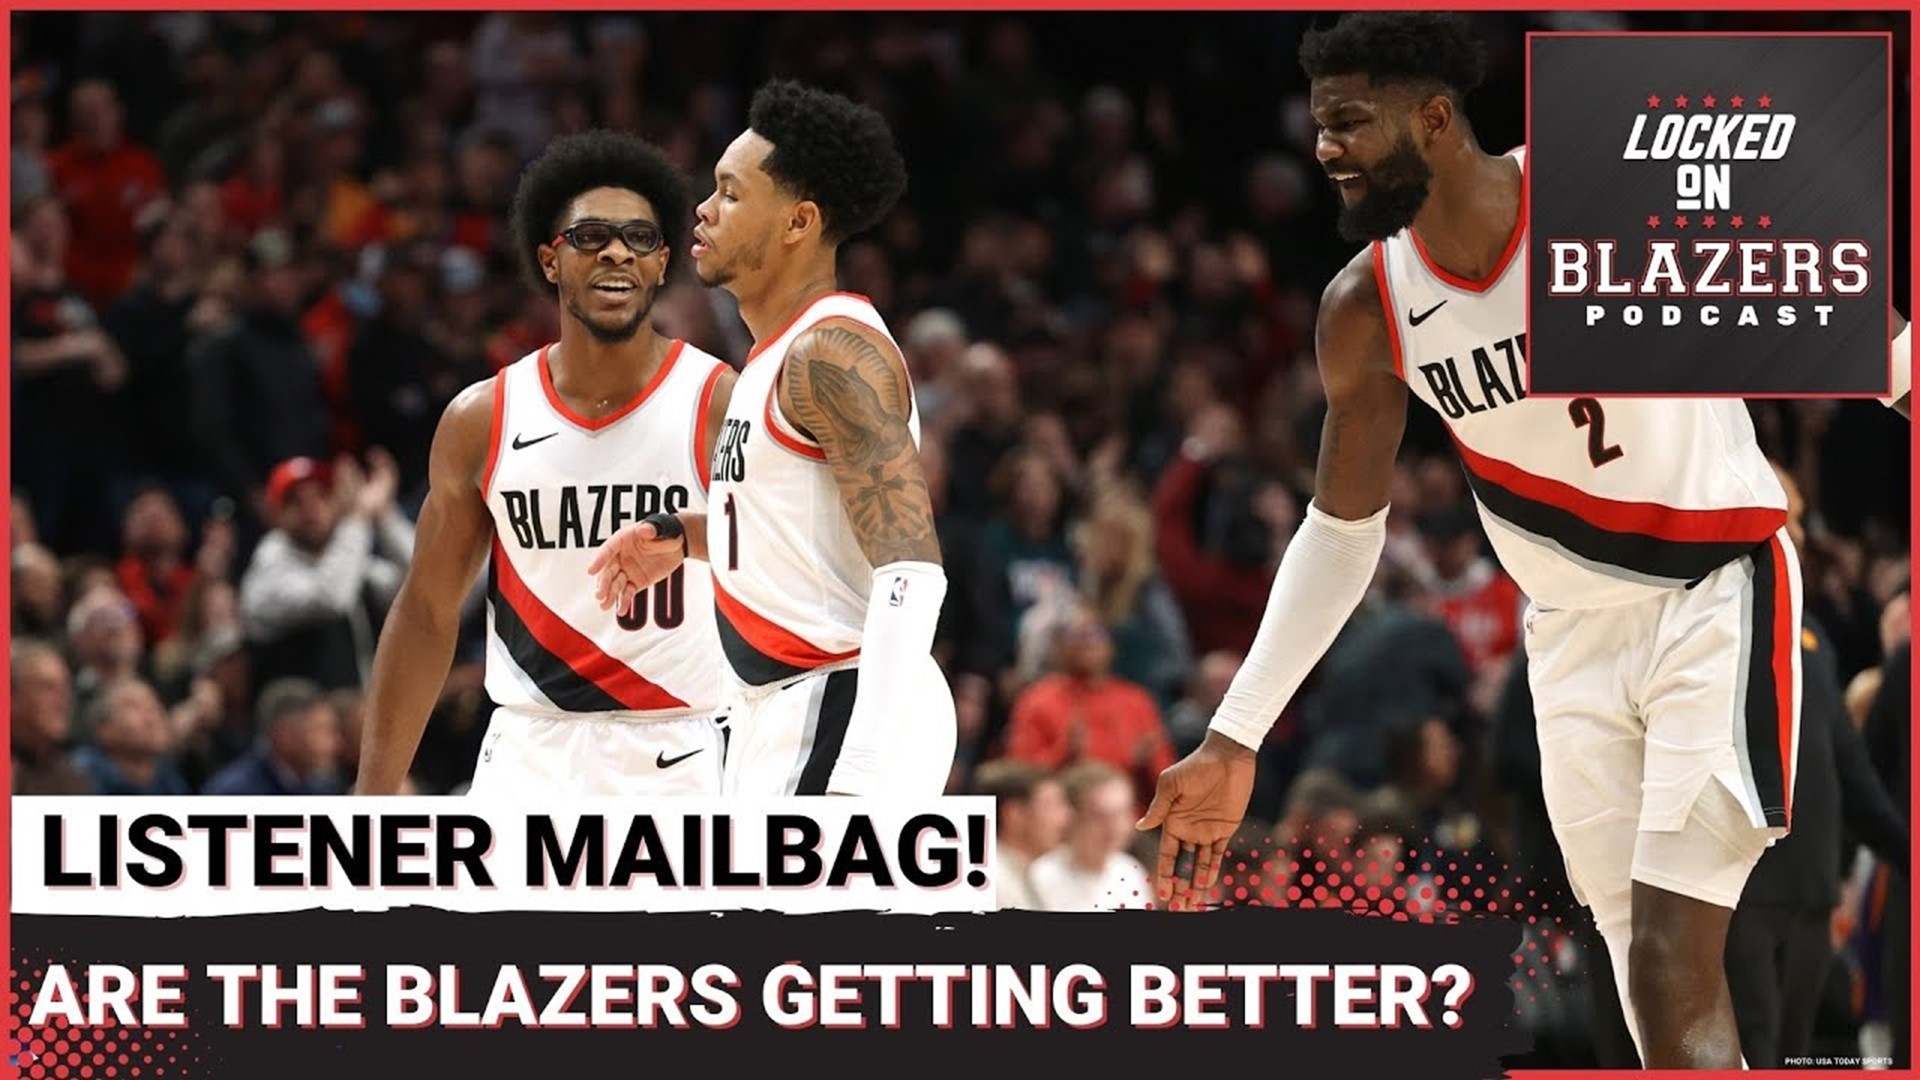 How Much Better Will the Portland Trail Blazers Be Next Season? Locked On Blazers Mailbag!